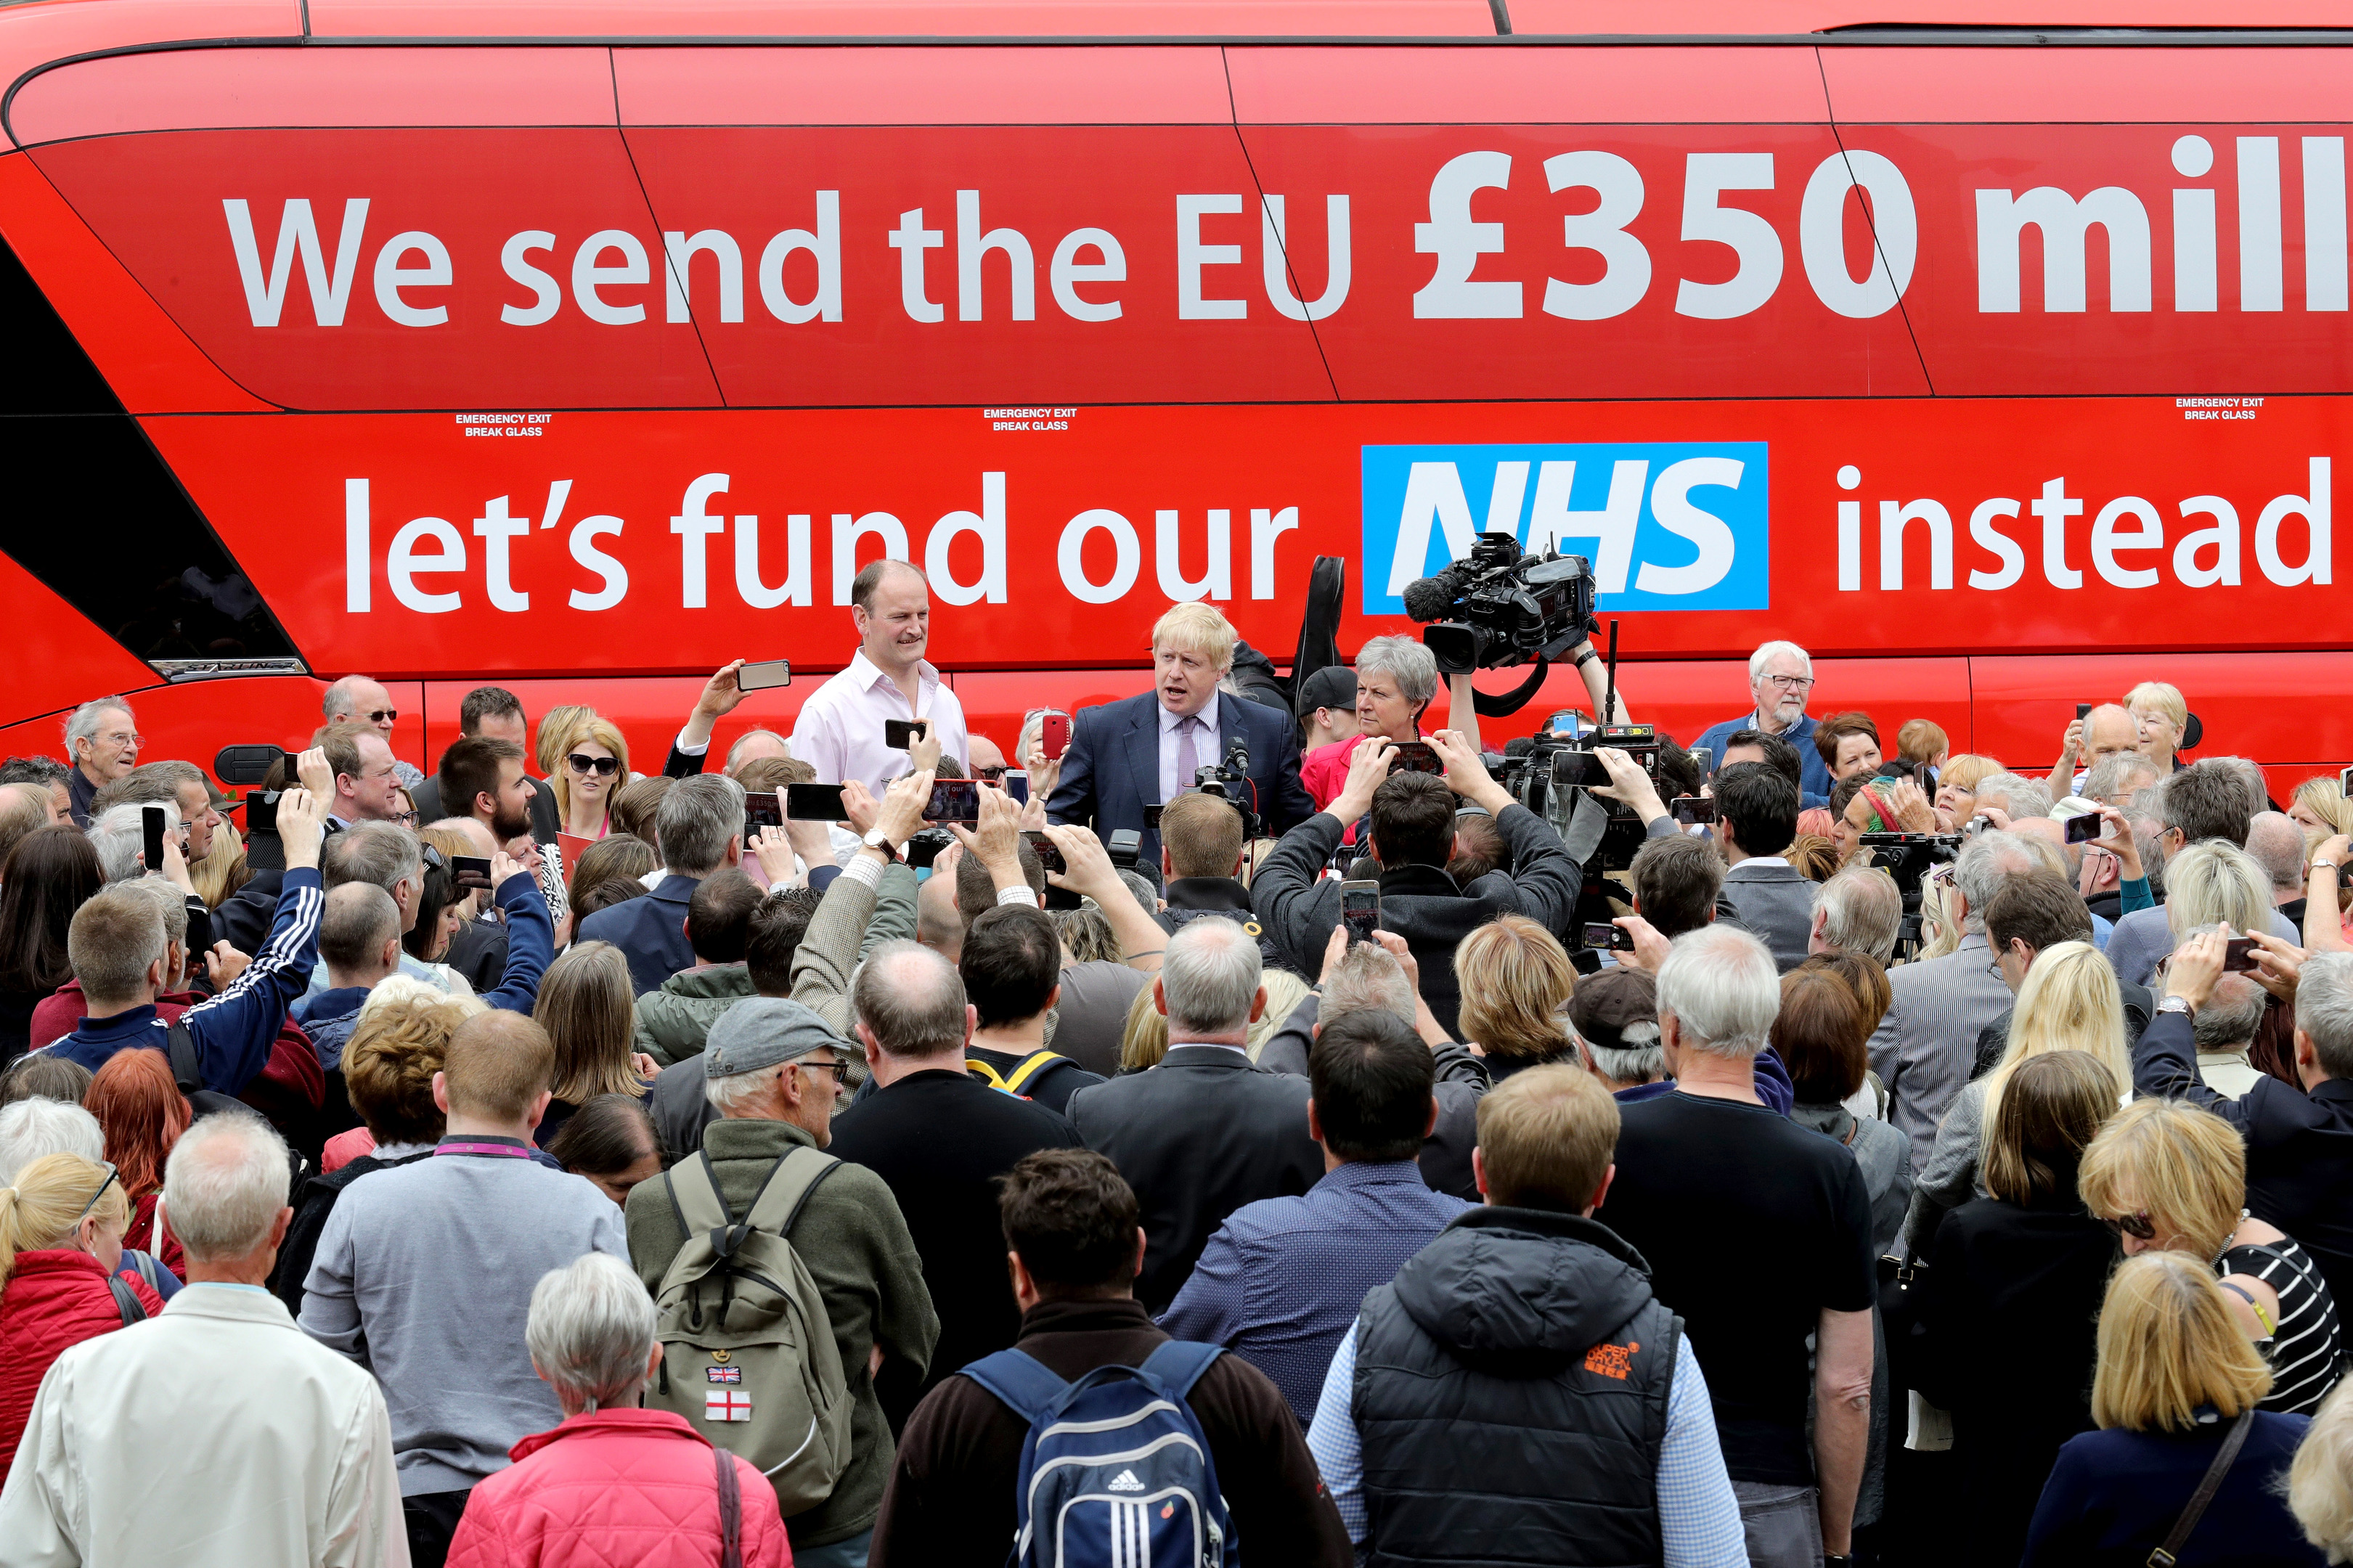 Vote Leave's referendum bus. Ian Duncan Smith says he did not repeat the £350 million for the NHS claim.